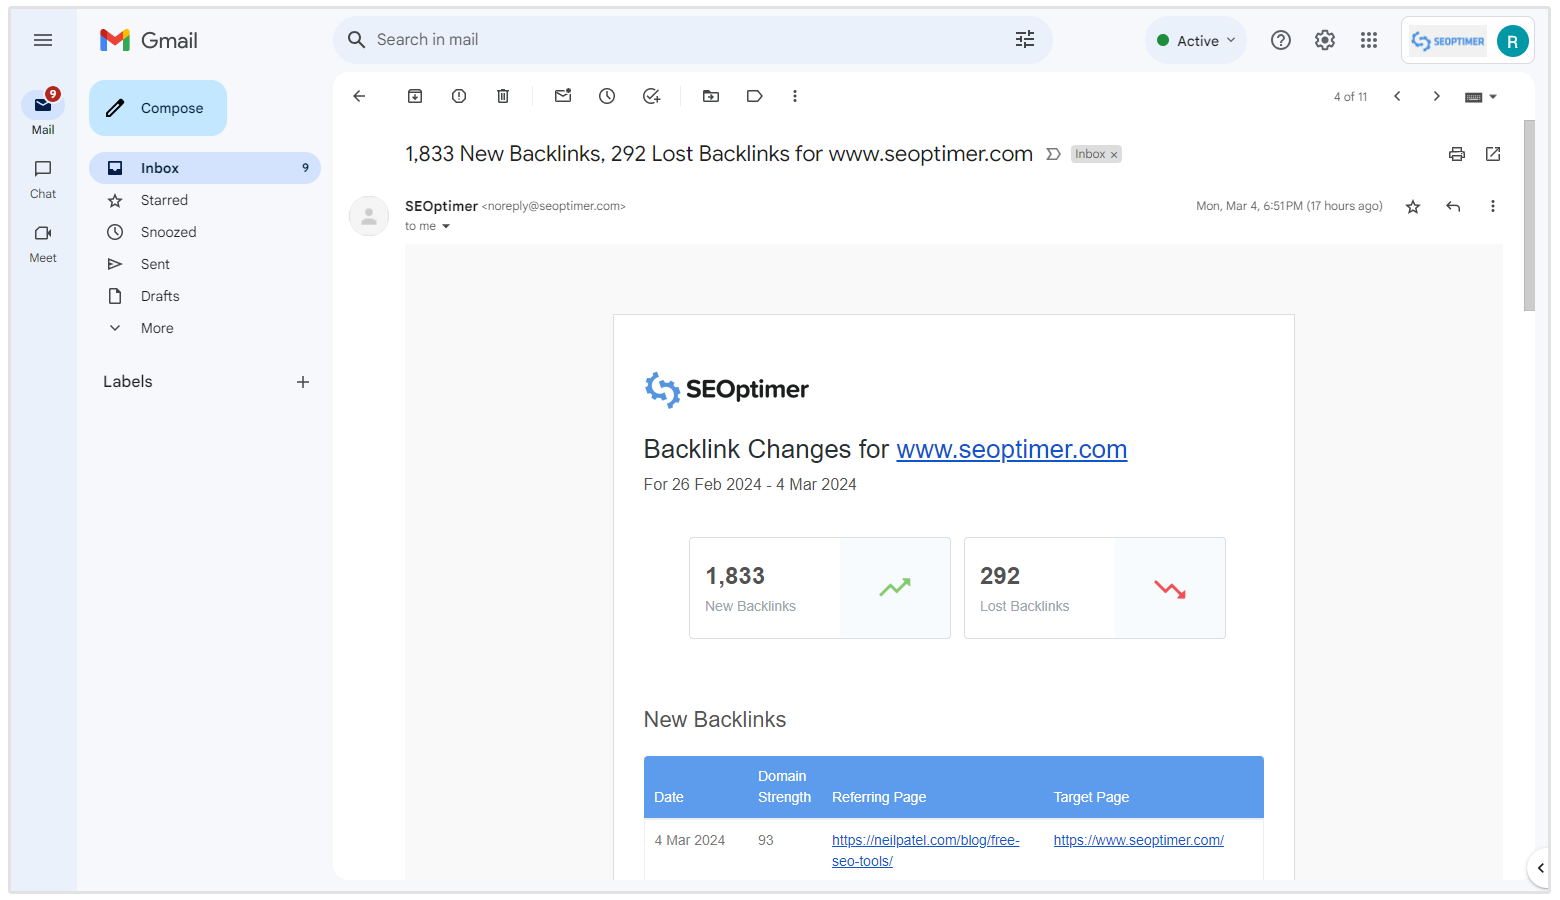 email summary of backlink changes